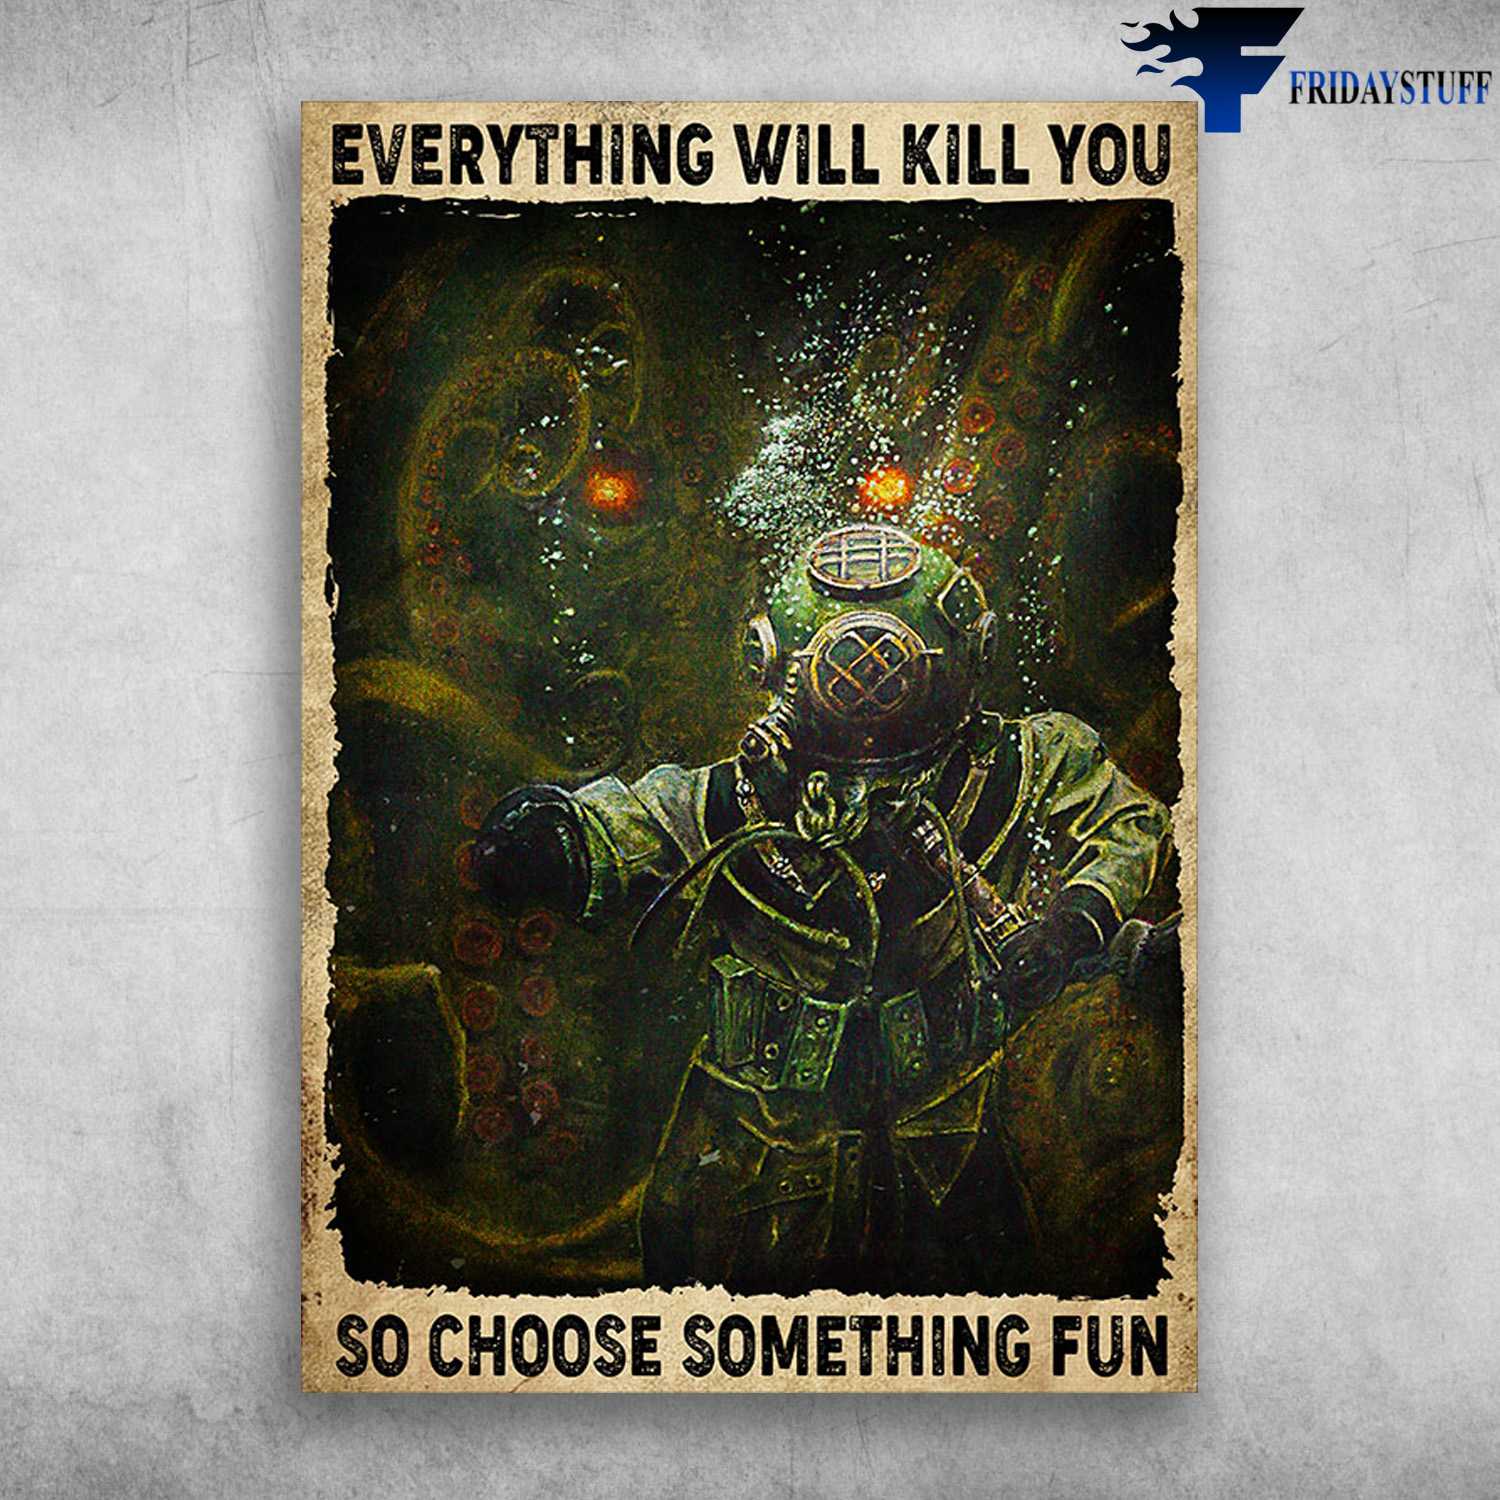 Scuba Diving, Diving Poster - Everything Will Kill You, So Choose Something Fun